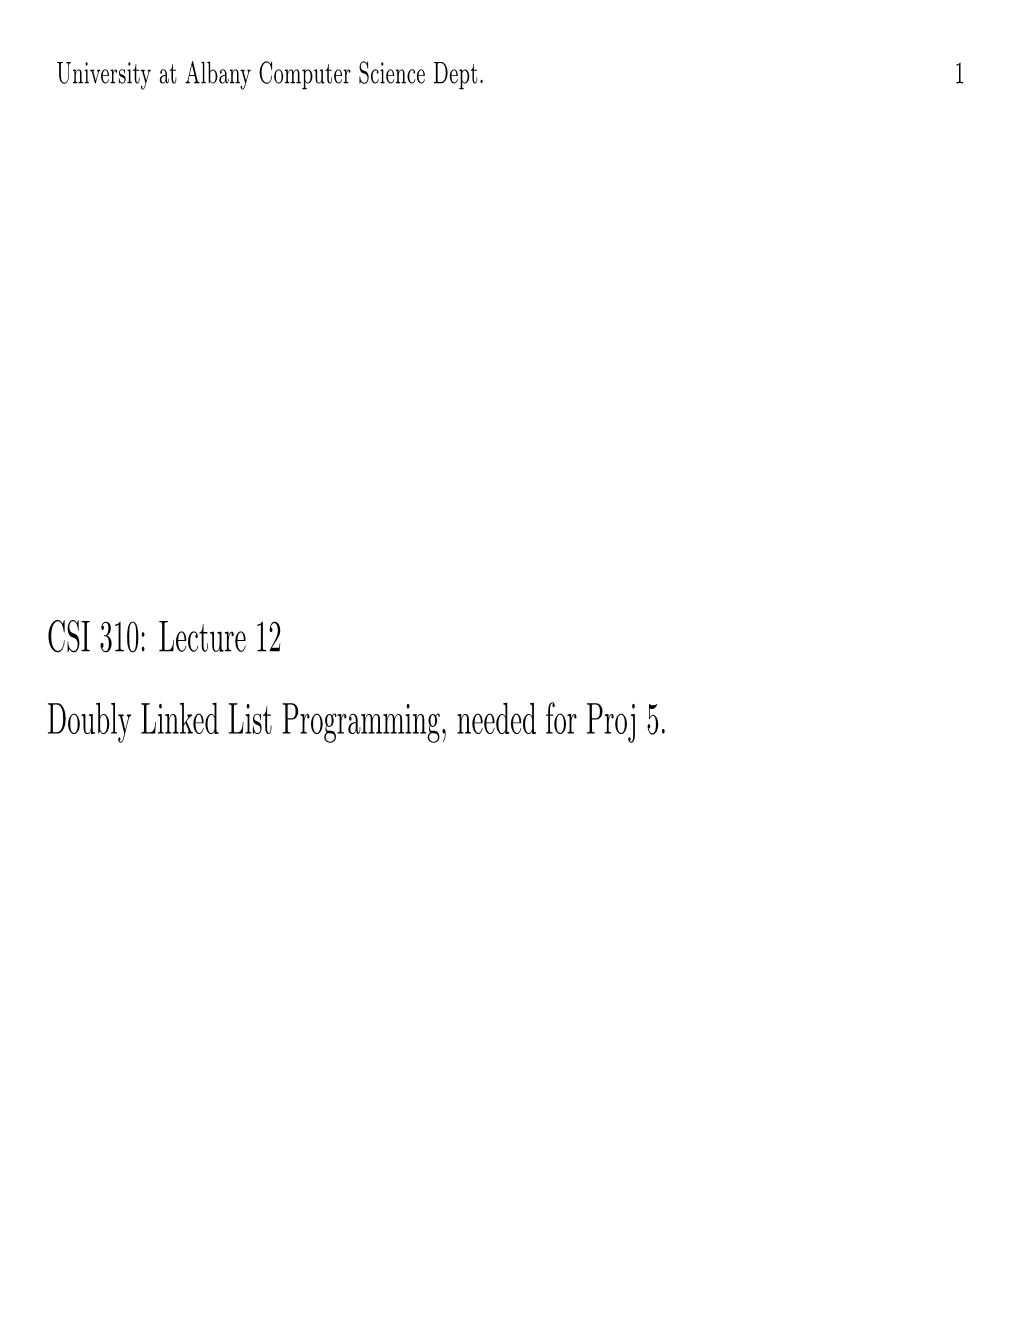 CSI 310: Lecture 12 Doubly Linked List Programming, Needed for Proj 5. University at Albany Computer Science Dept